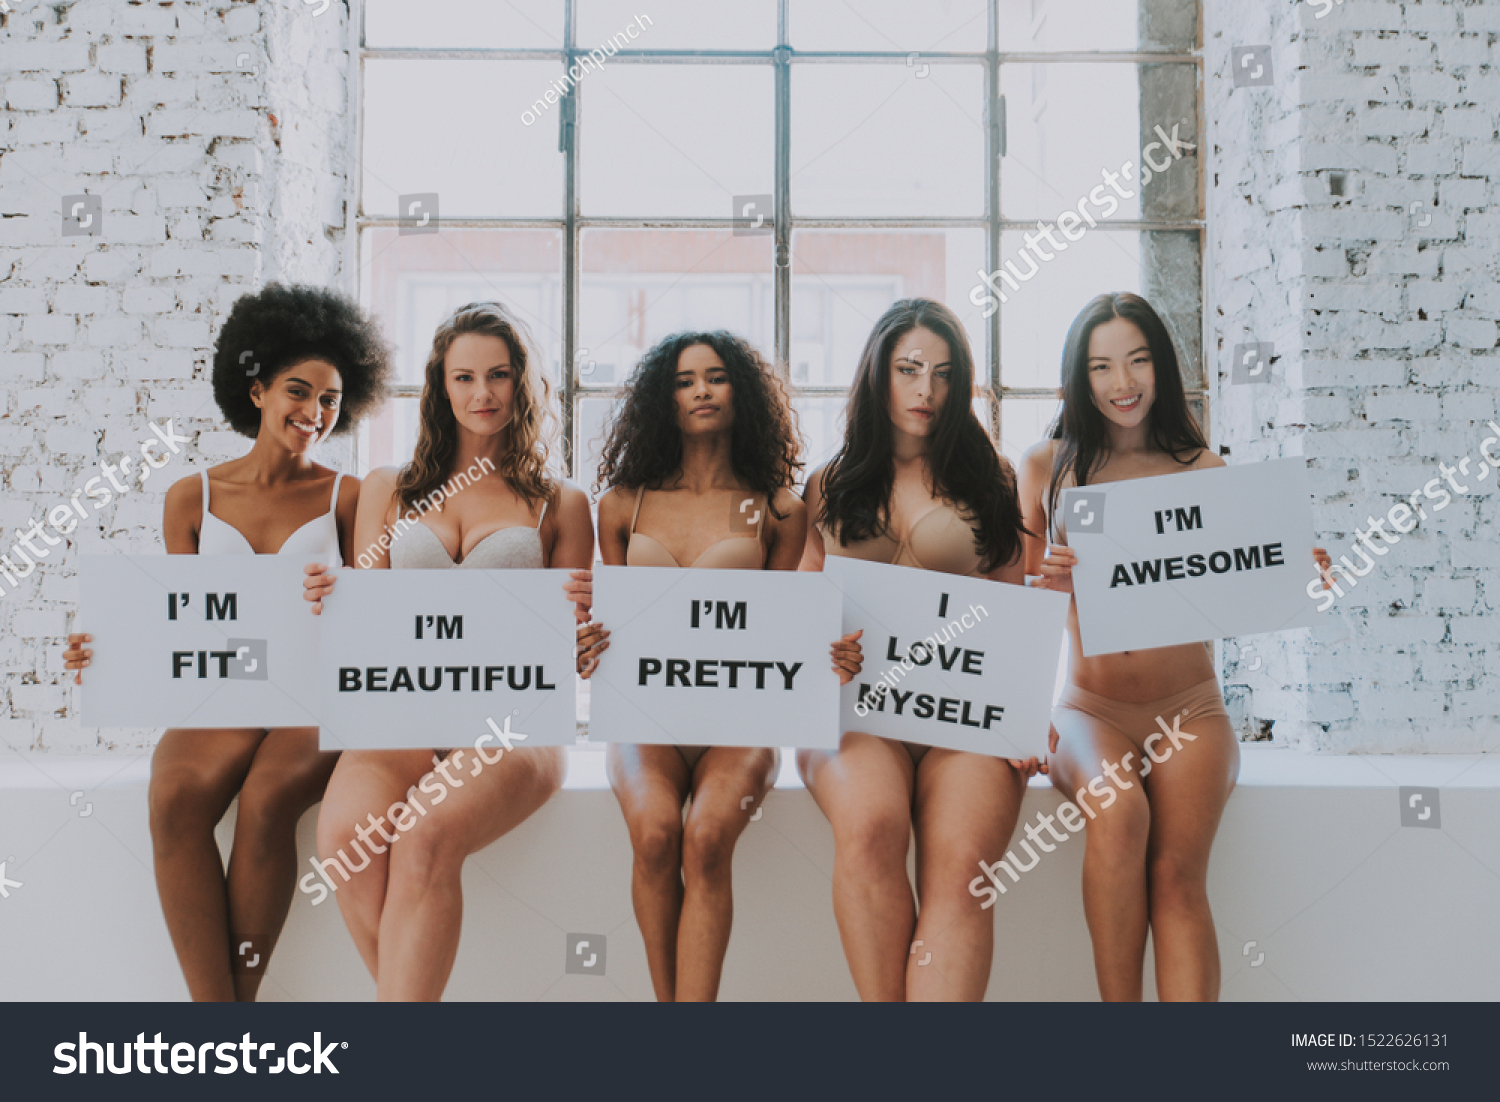 Group of women with different body and ethnicity posing together to show the woman power and strength. Curvy and skinny kind of female body concept #1522626131